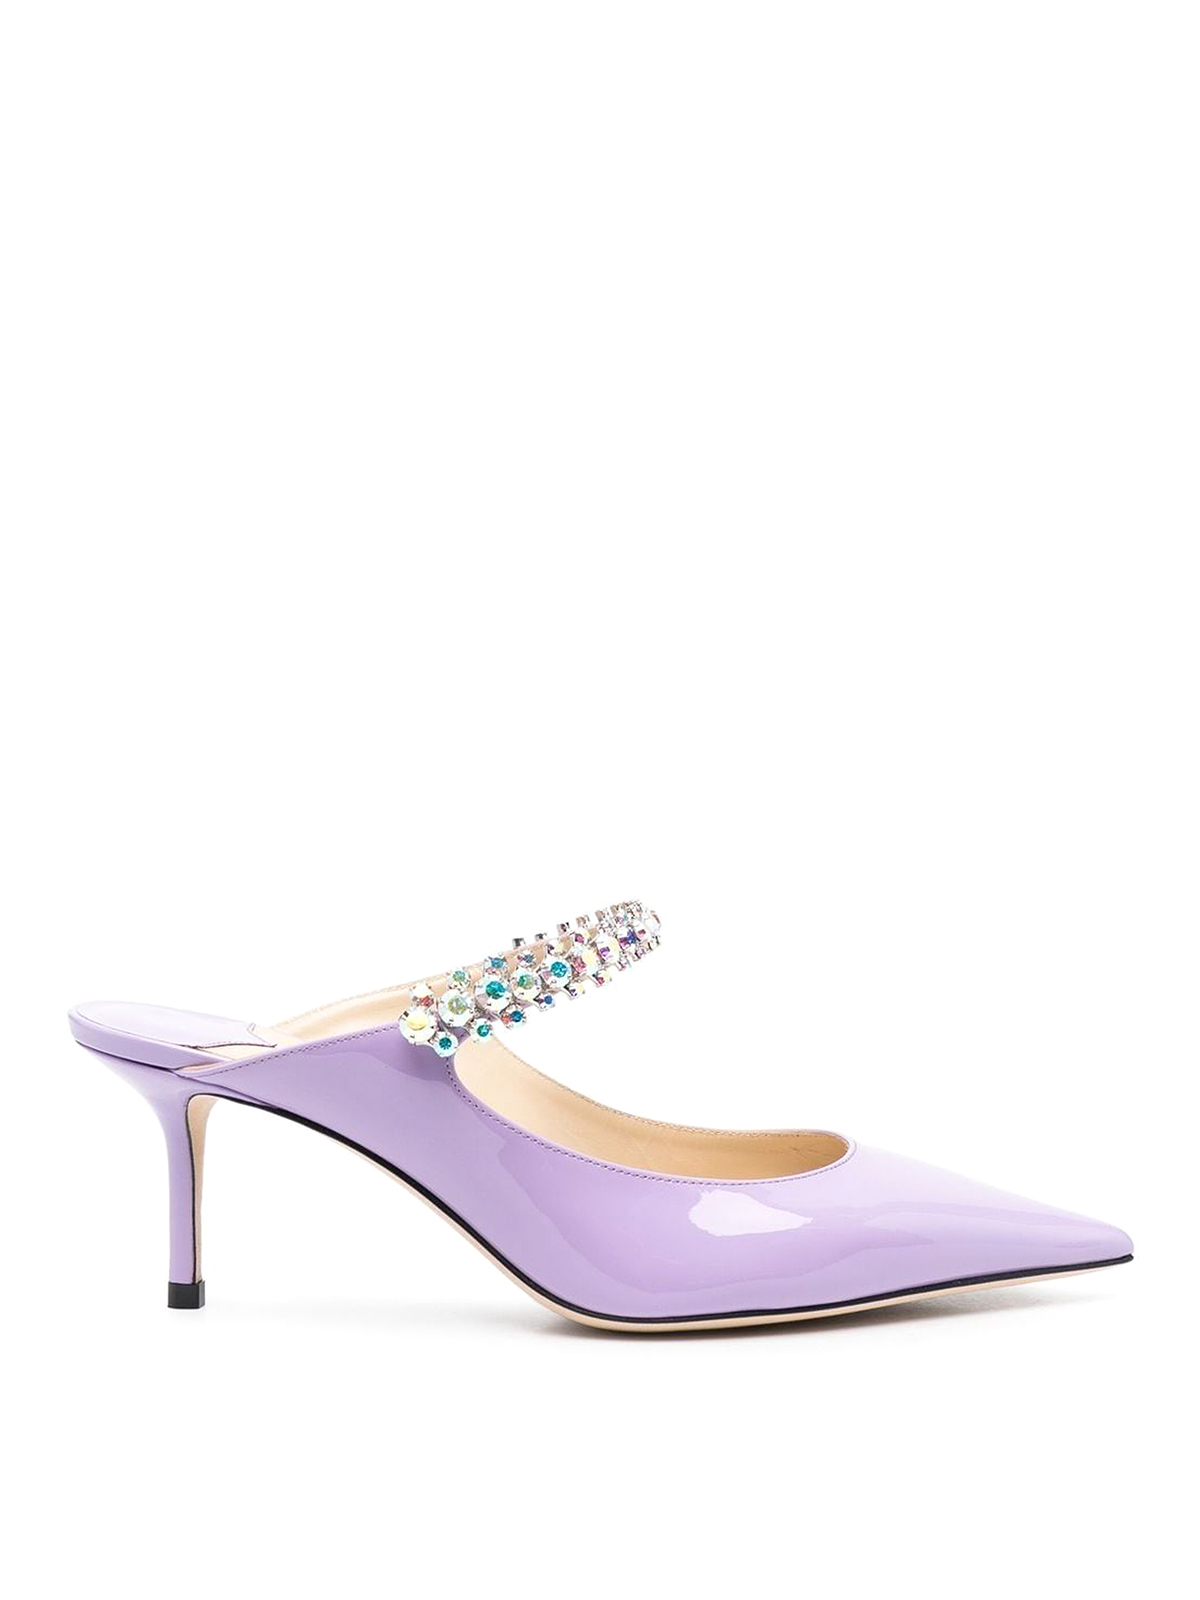 Mules shoes Jimmy Choo - Bing 65 crystal strap patent leather mules -  BING65PATWISTERIA